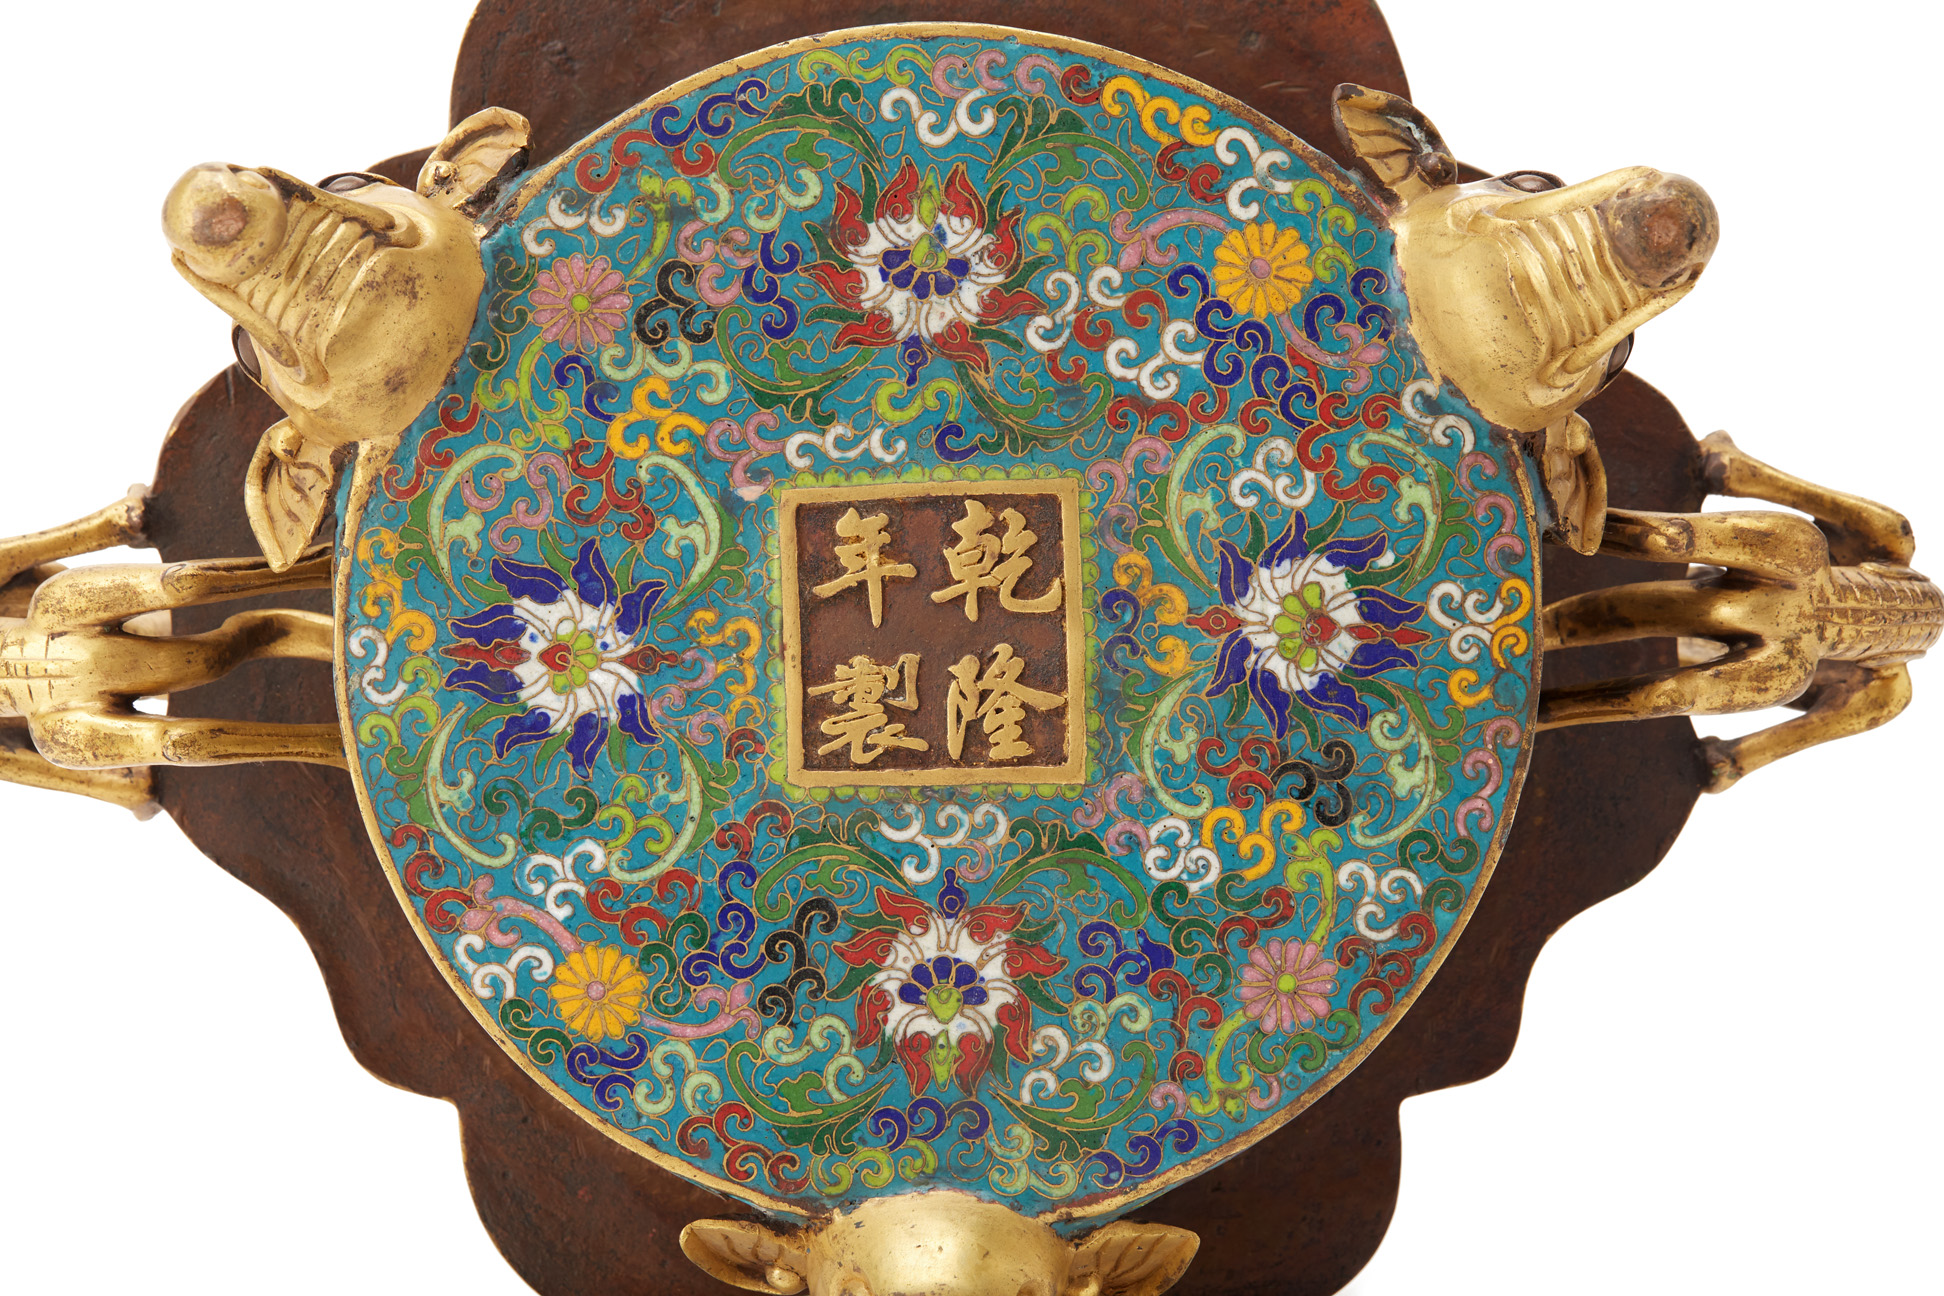 A CLOISONNE ENAMEL TRIPOD CENSER AND COVER - Image 5 of 9